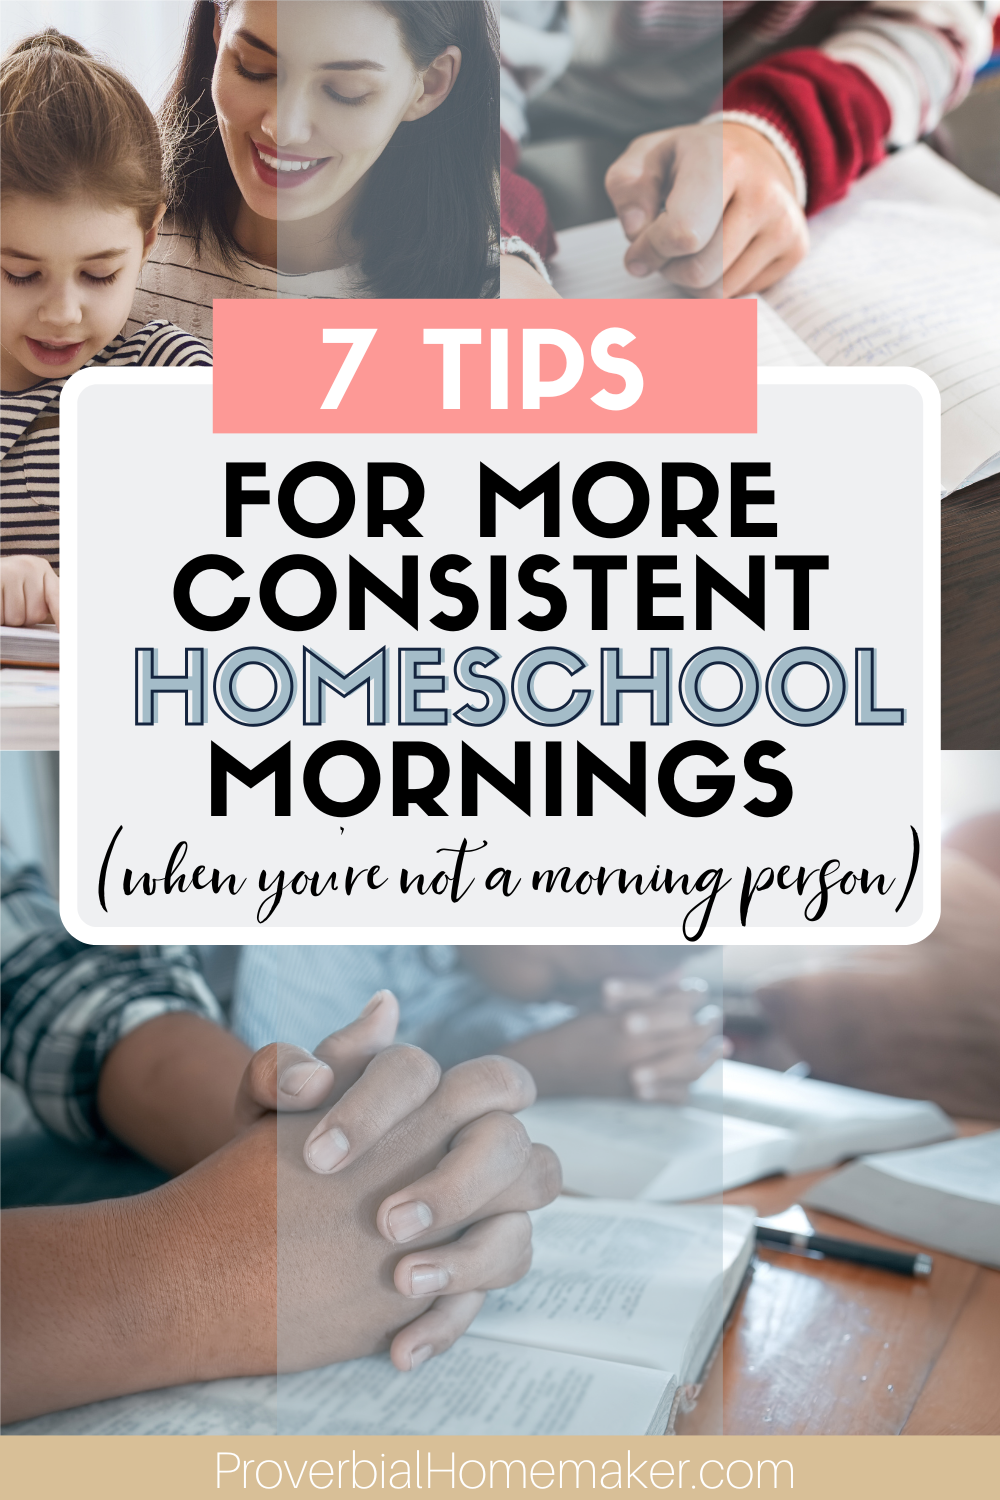 Five unique tips for creating a more consistent homeschool morning (when schedules and self-discipline are a challenge).